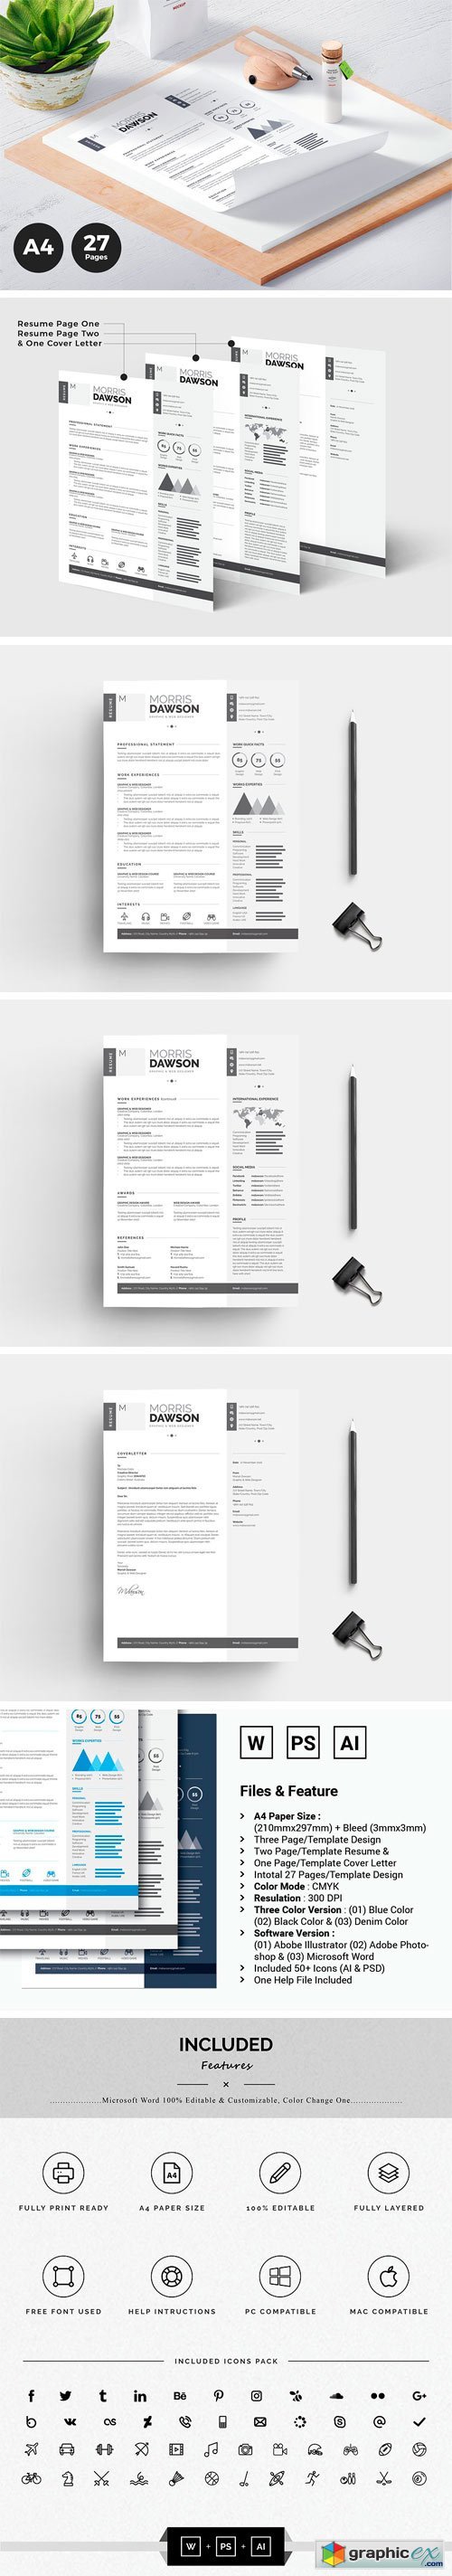 Clean Infographic Resume/CV